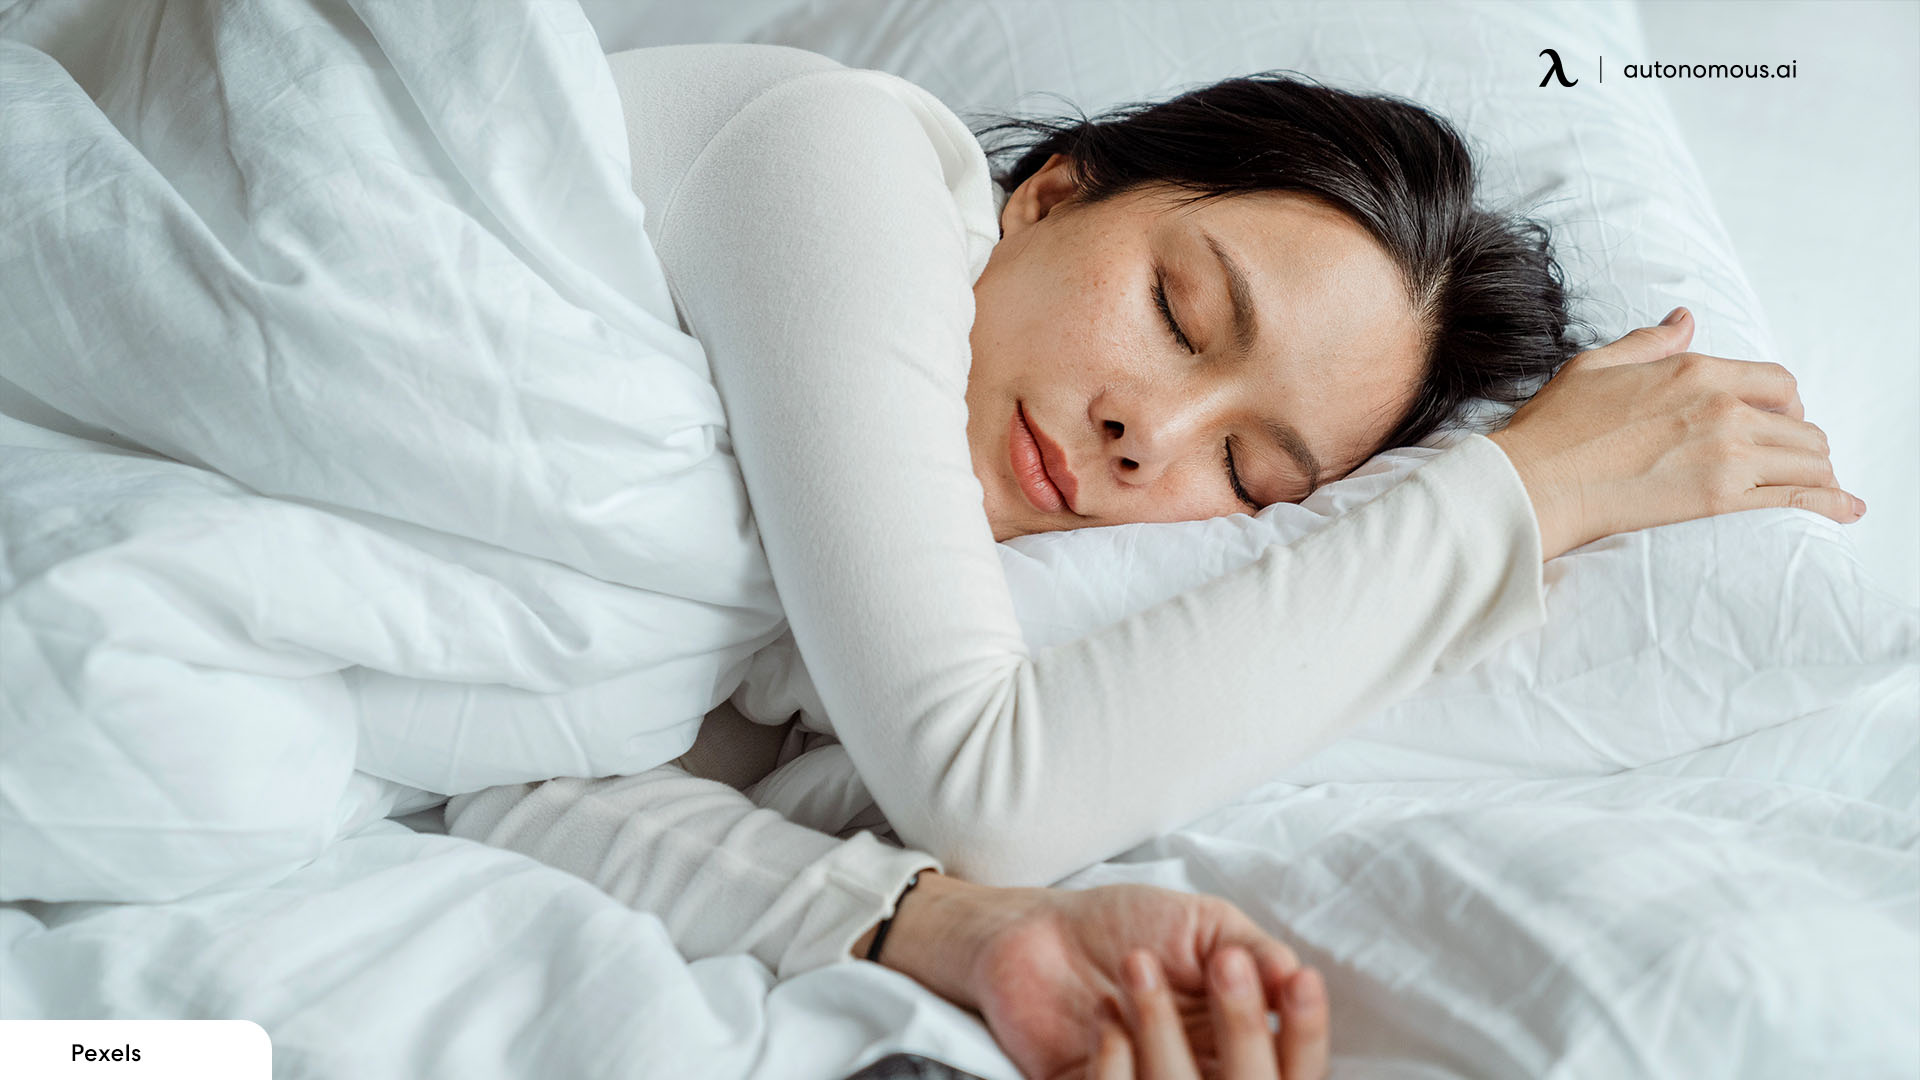 More likely to sleep better